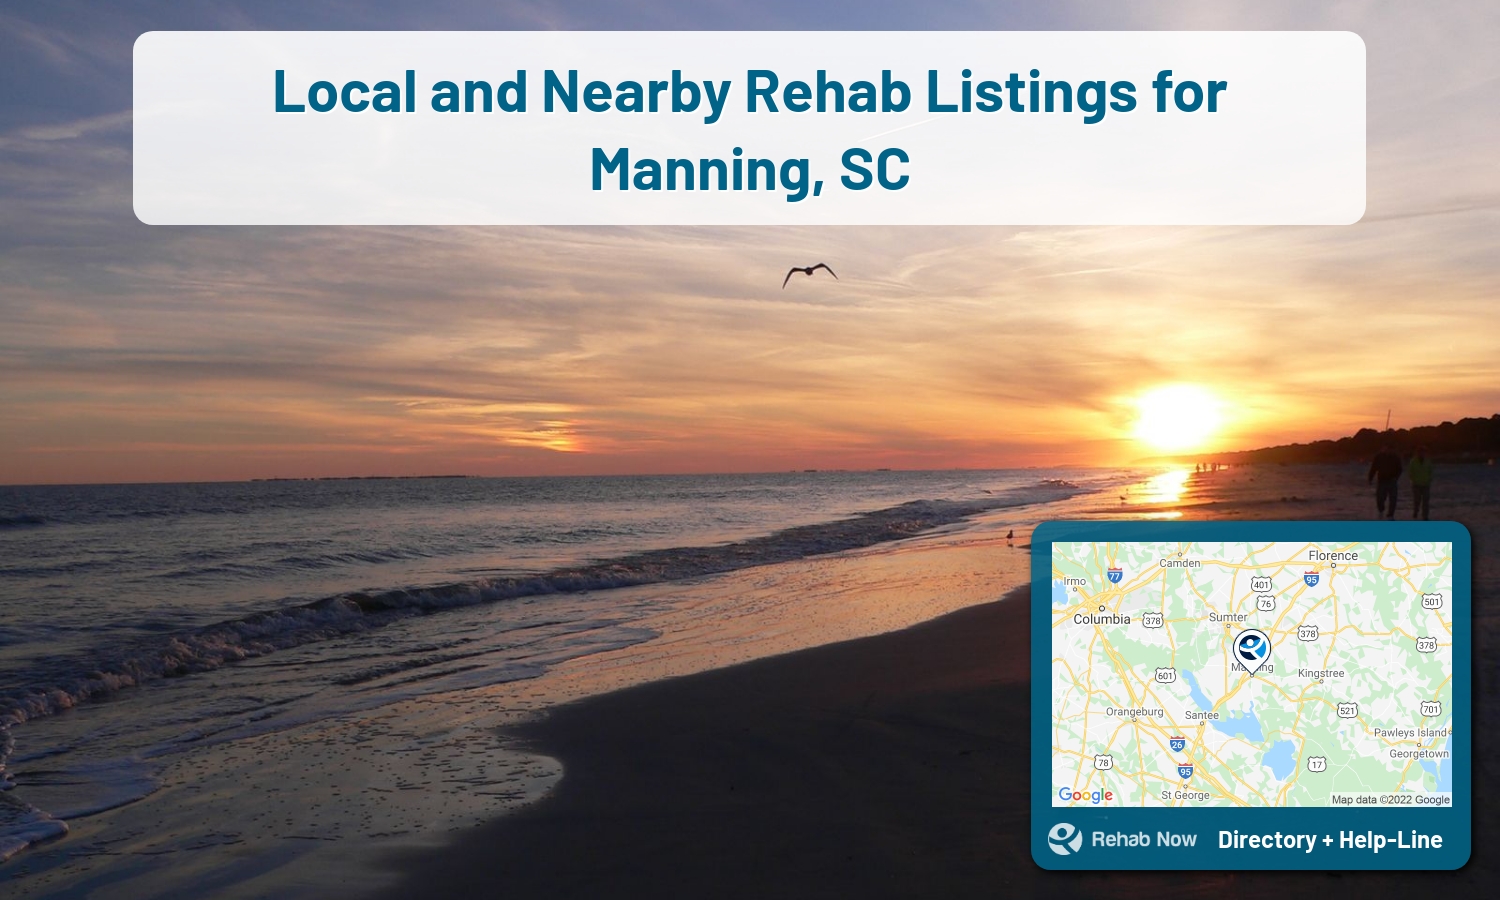 List of alcohol and drug treatment centers near you in Manning, South Carolina. Research certifications, programs, methods, pricing, and more.